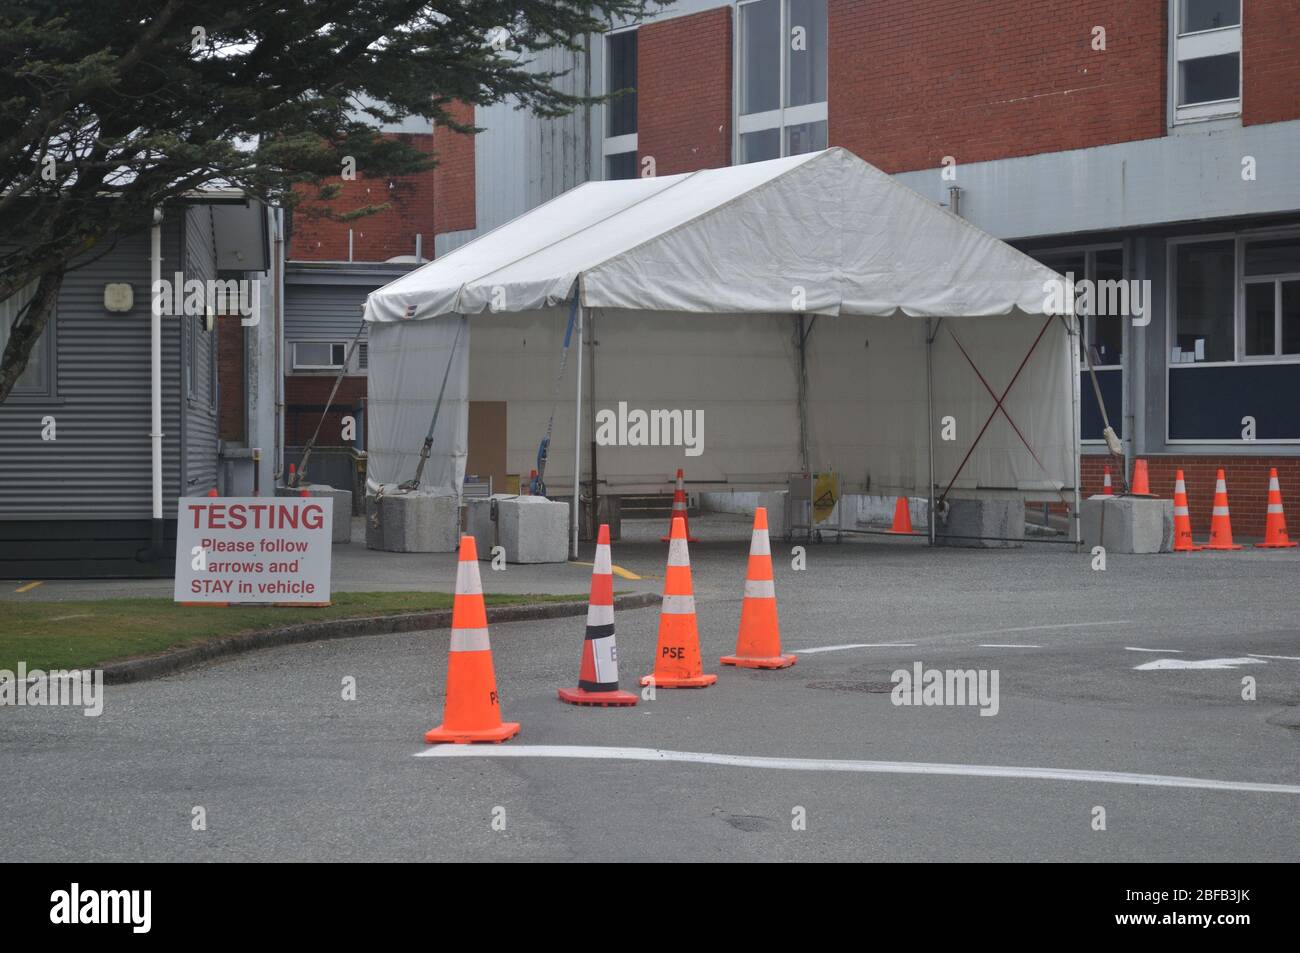 GREYMOUTH, NEW ZEALAND; APRIL 11, 2020: The Covid 19 testing station at Greymouth Base Hospital during the level 4 lockdown in New Zealand, April 11,  2020 Stock Photo